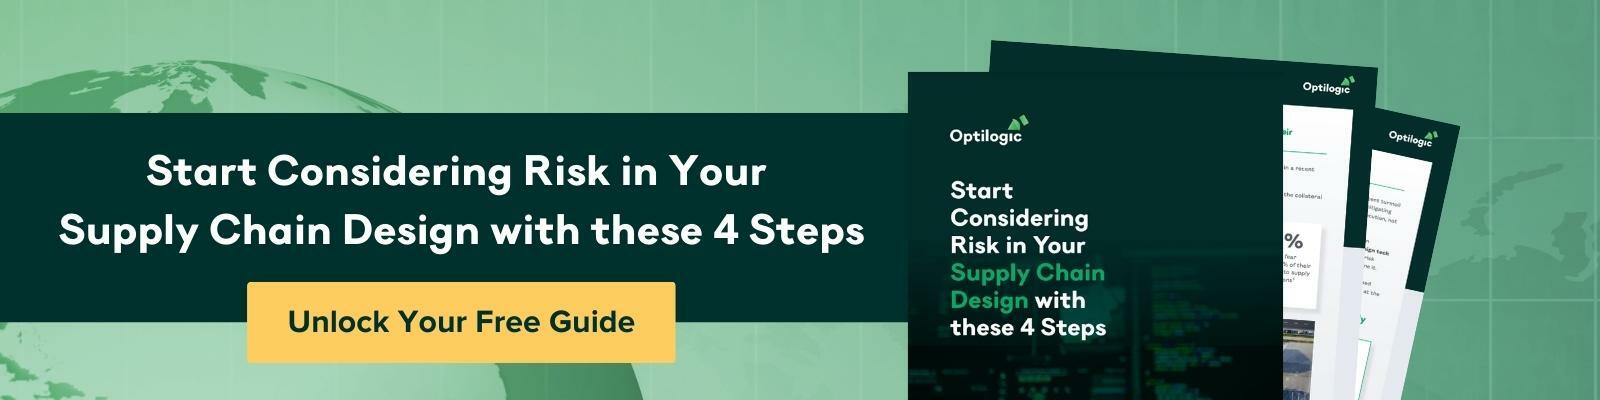 Start Considering Risk in Your Supply Chain Design with these 4 Steps CTA